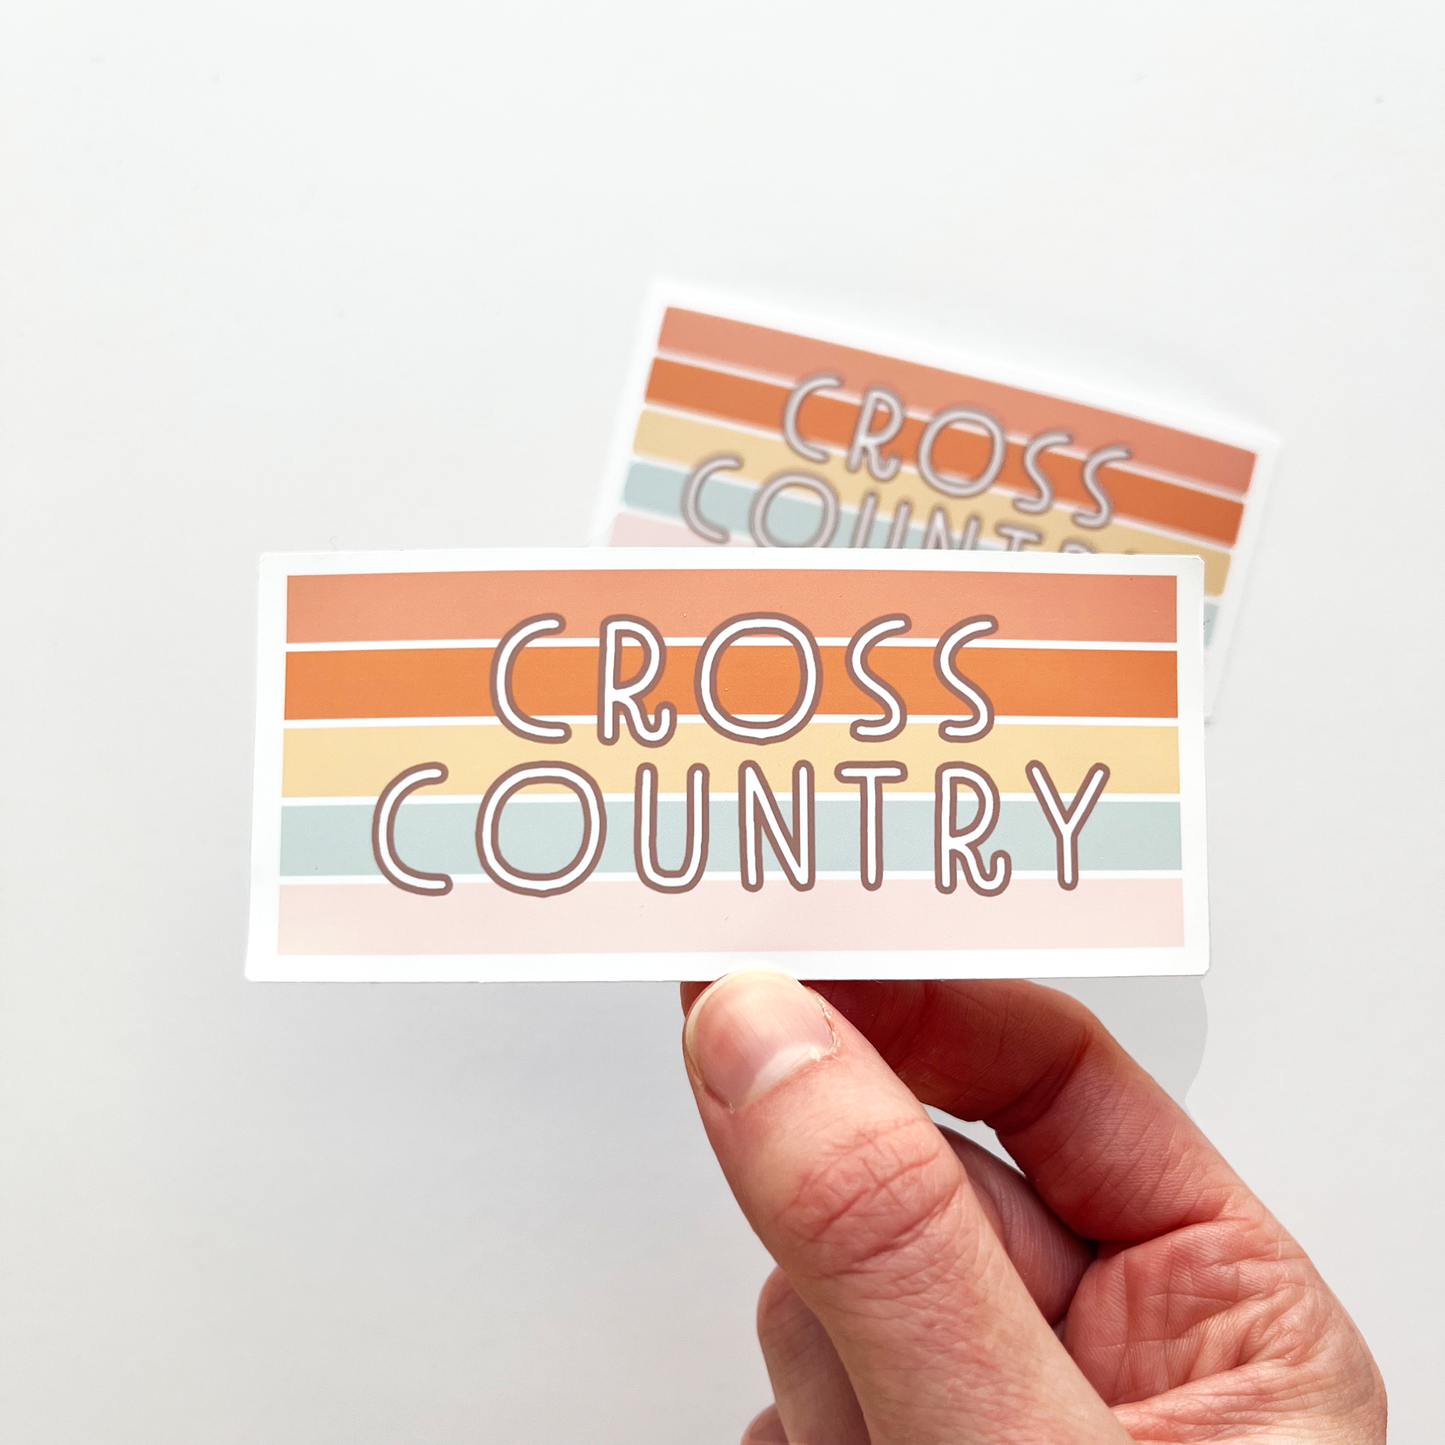 Rectangular cross country sticker with horizontal stripes of peach, orange, yellow, light blue, and light pink